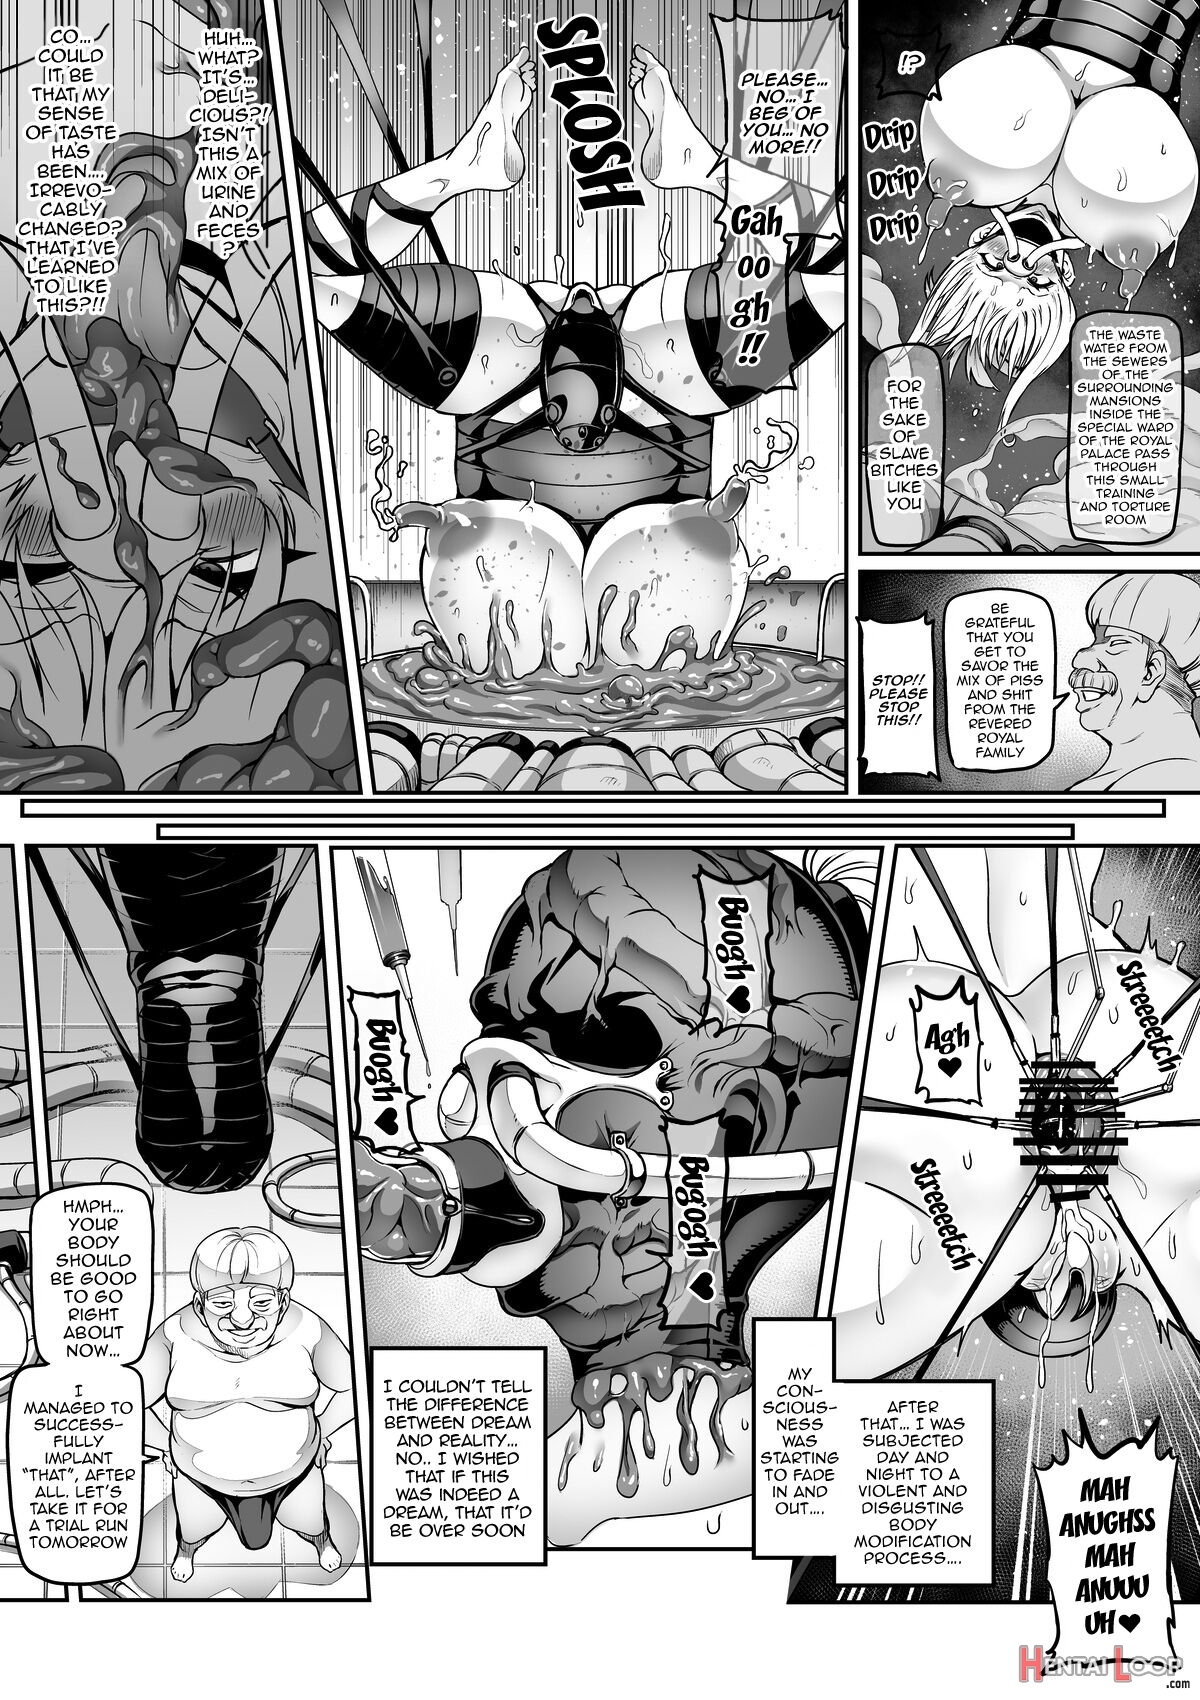 Demon Slaying Battle Princess Cecilia If Lunaria And The Trap Of The Perverted Royal Family ~ugly Remodeling Edition~ page 6